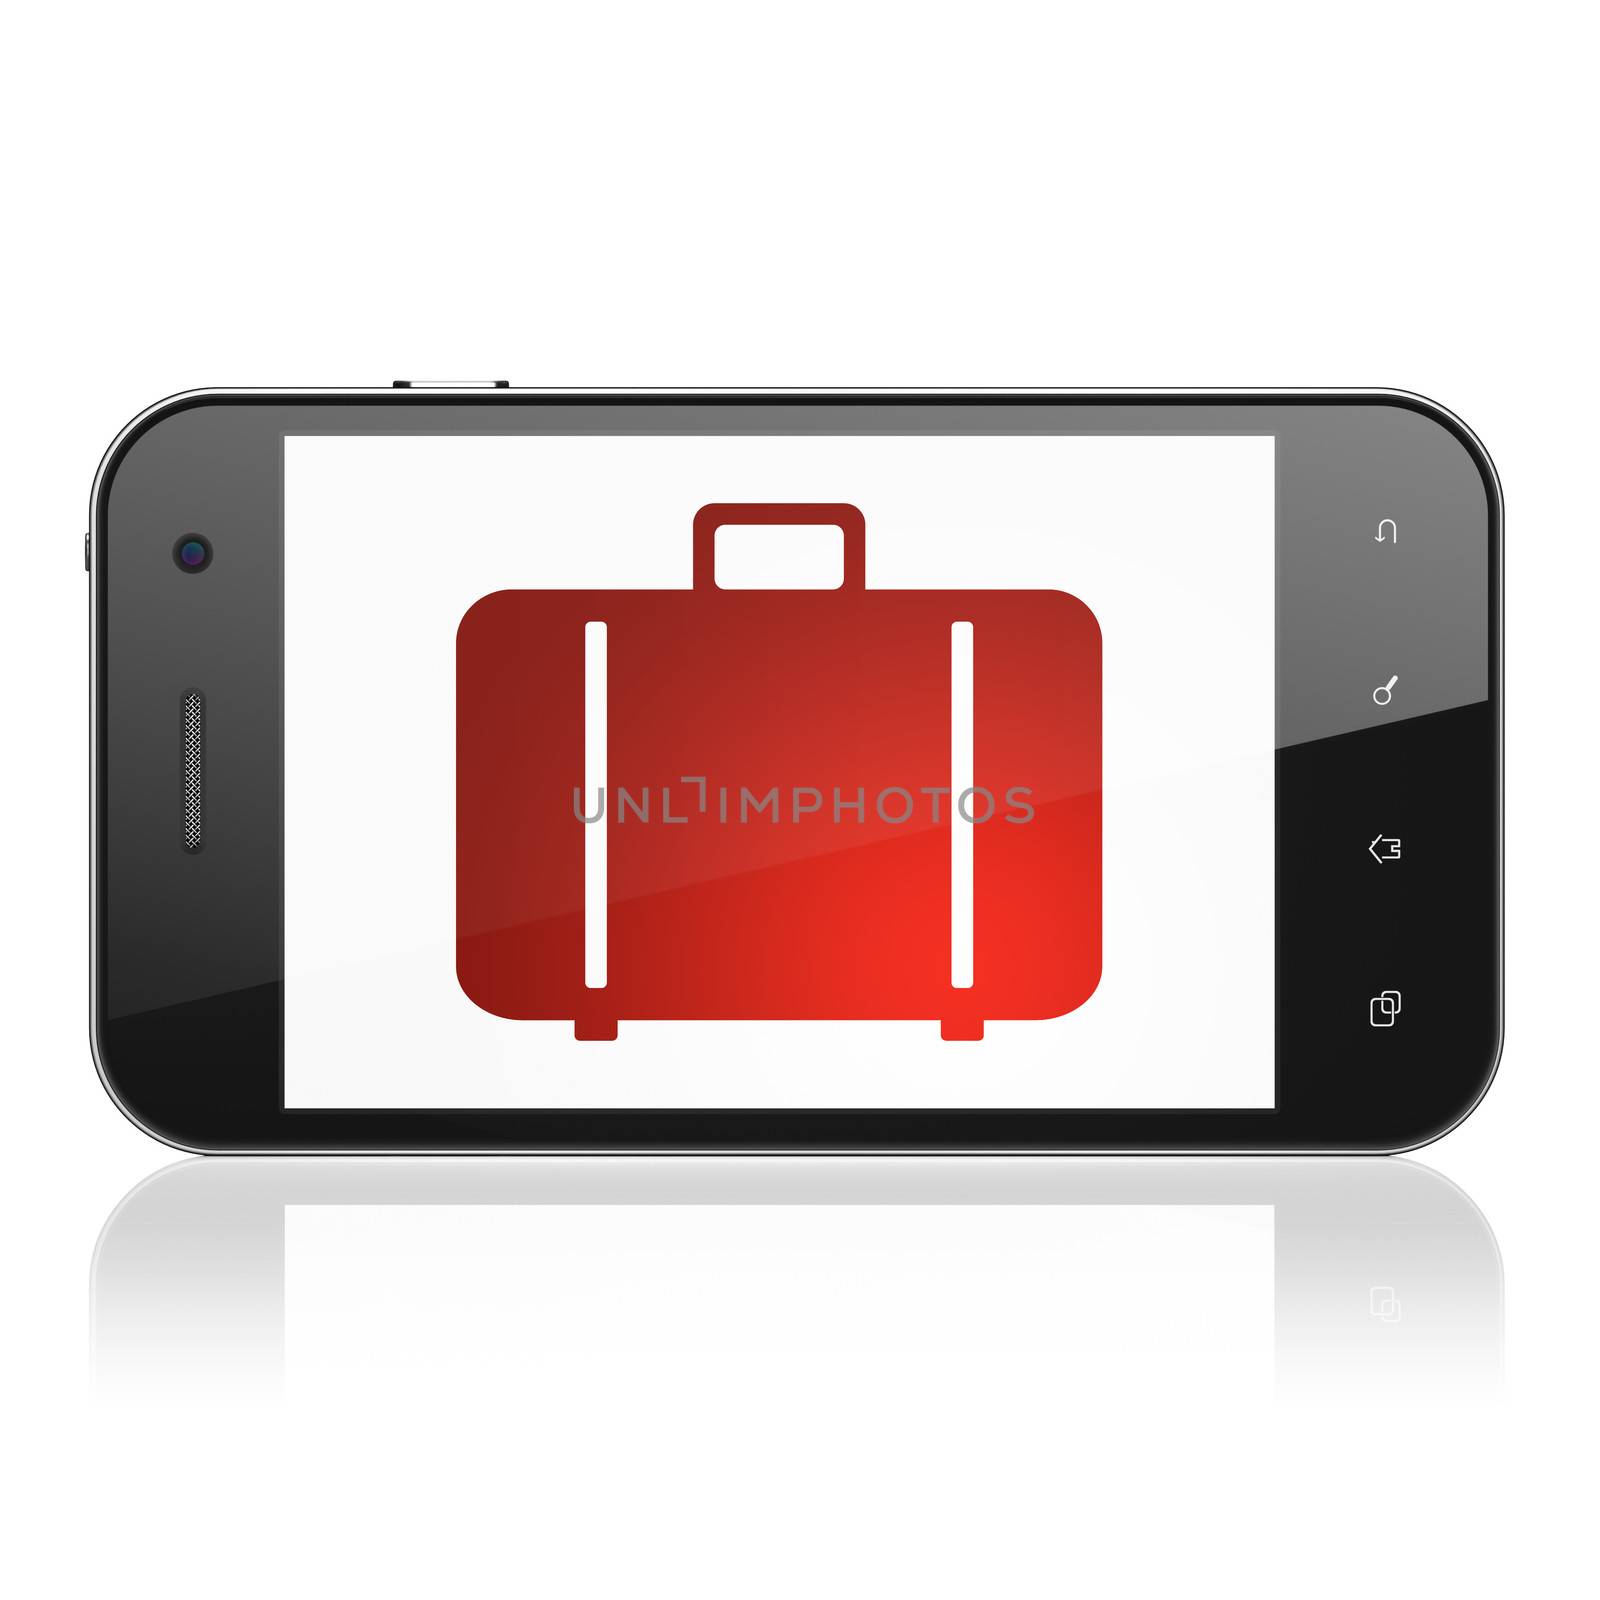 Travel concept: smartphone with Bag icon on display. Mobile smart phone on White background, cell phone 3d render